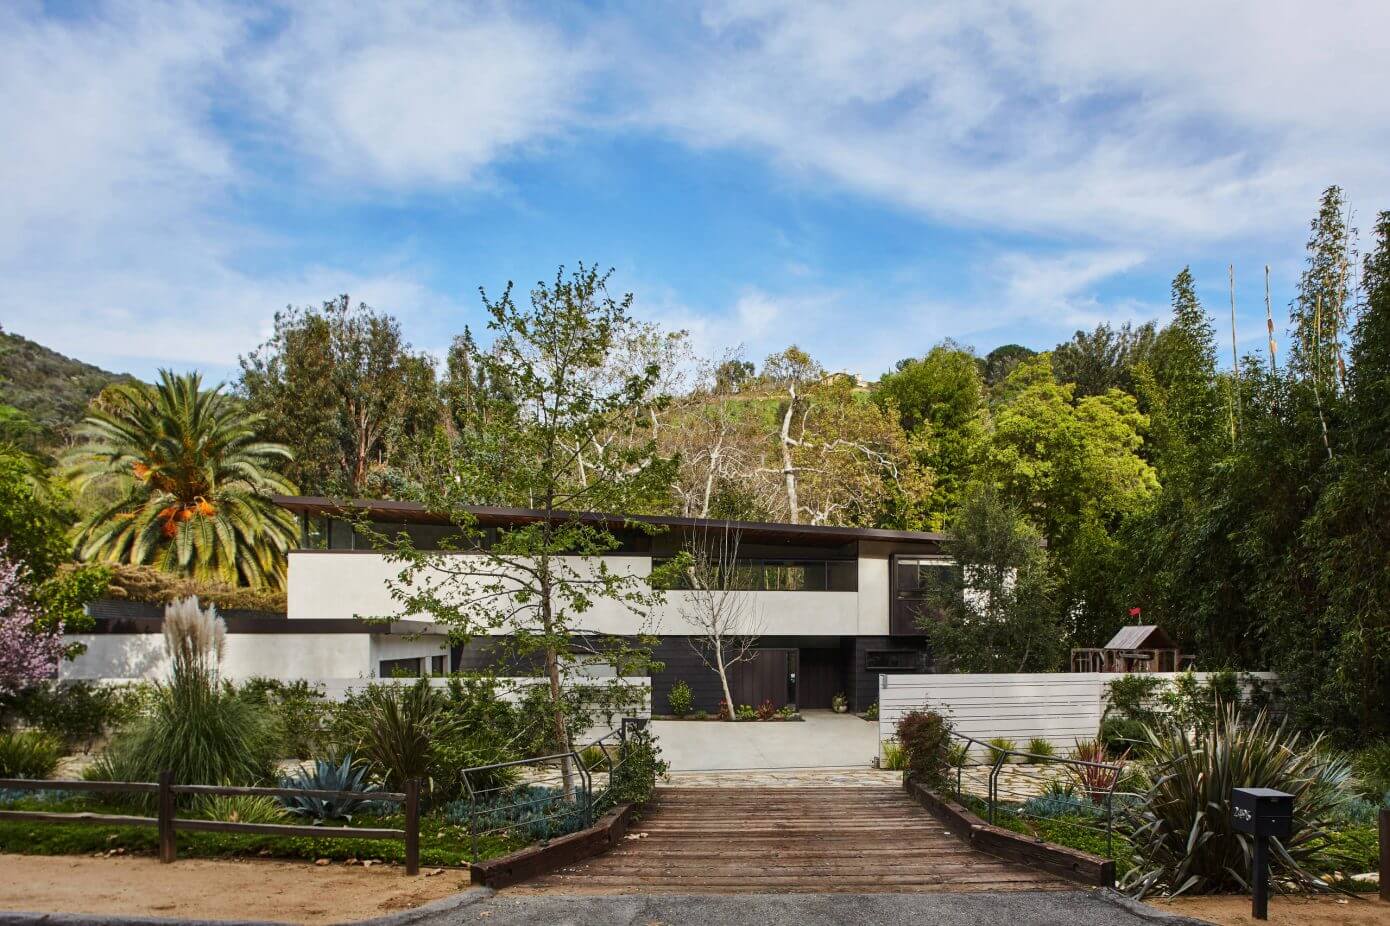 Mandeville Canyon Home by Jesse Bornstein